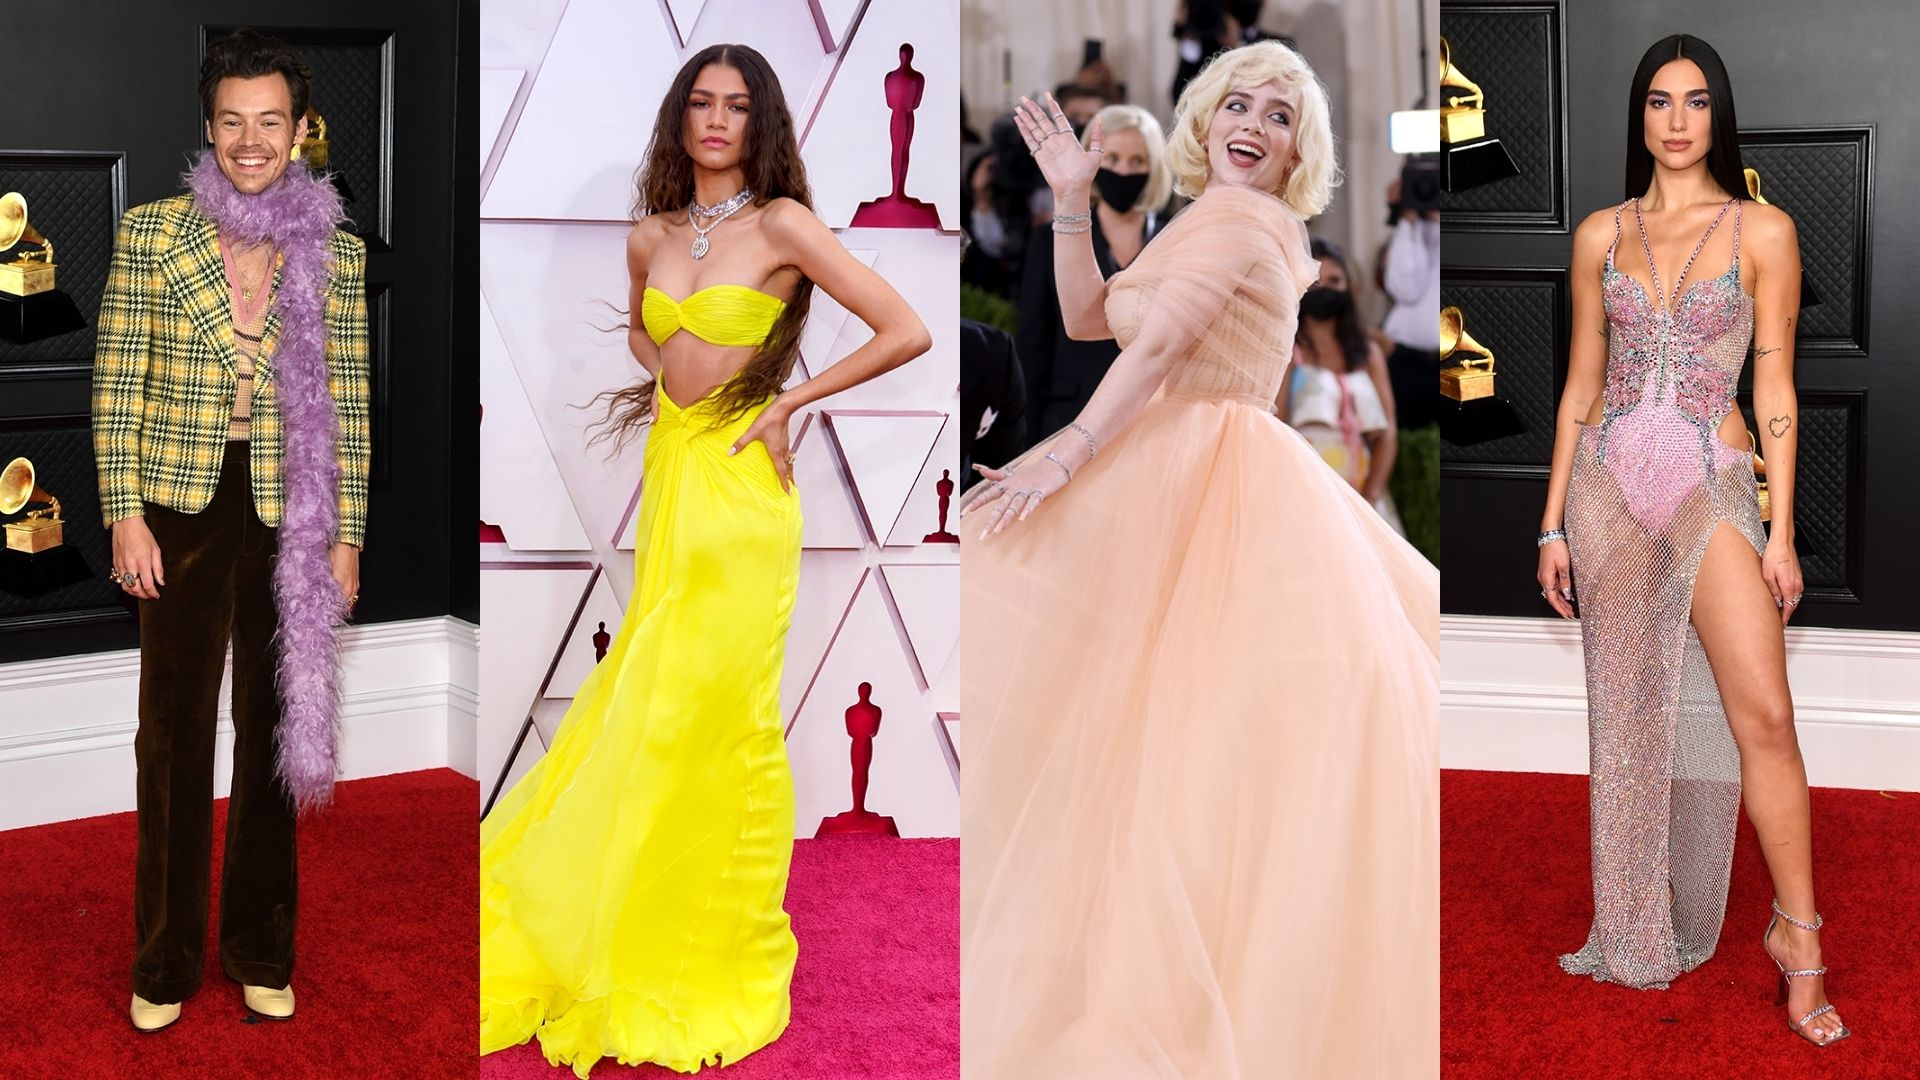 The Best Red Carpet Fashion Trends of 2021